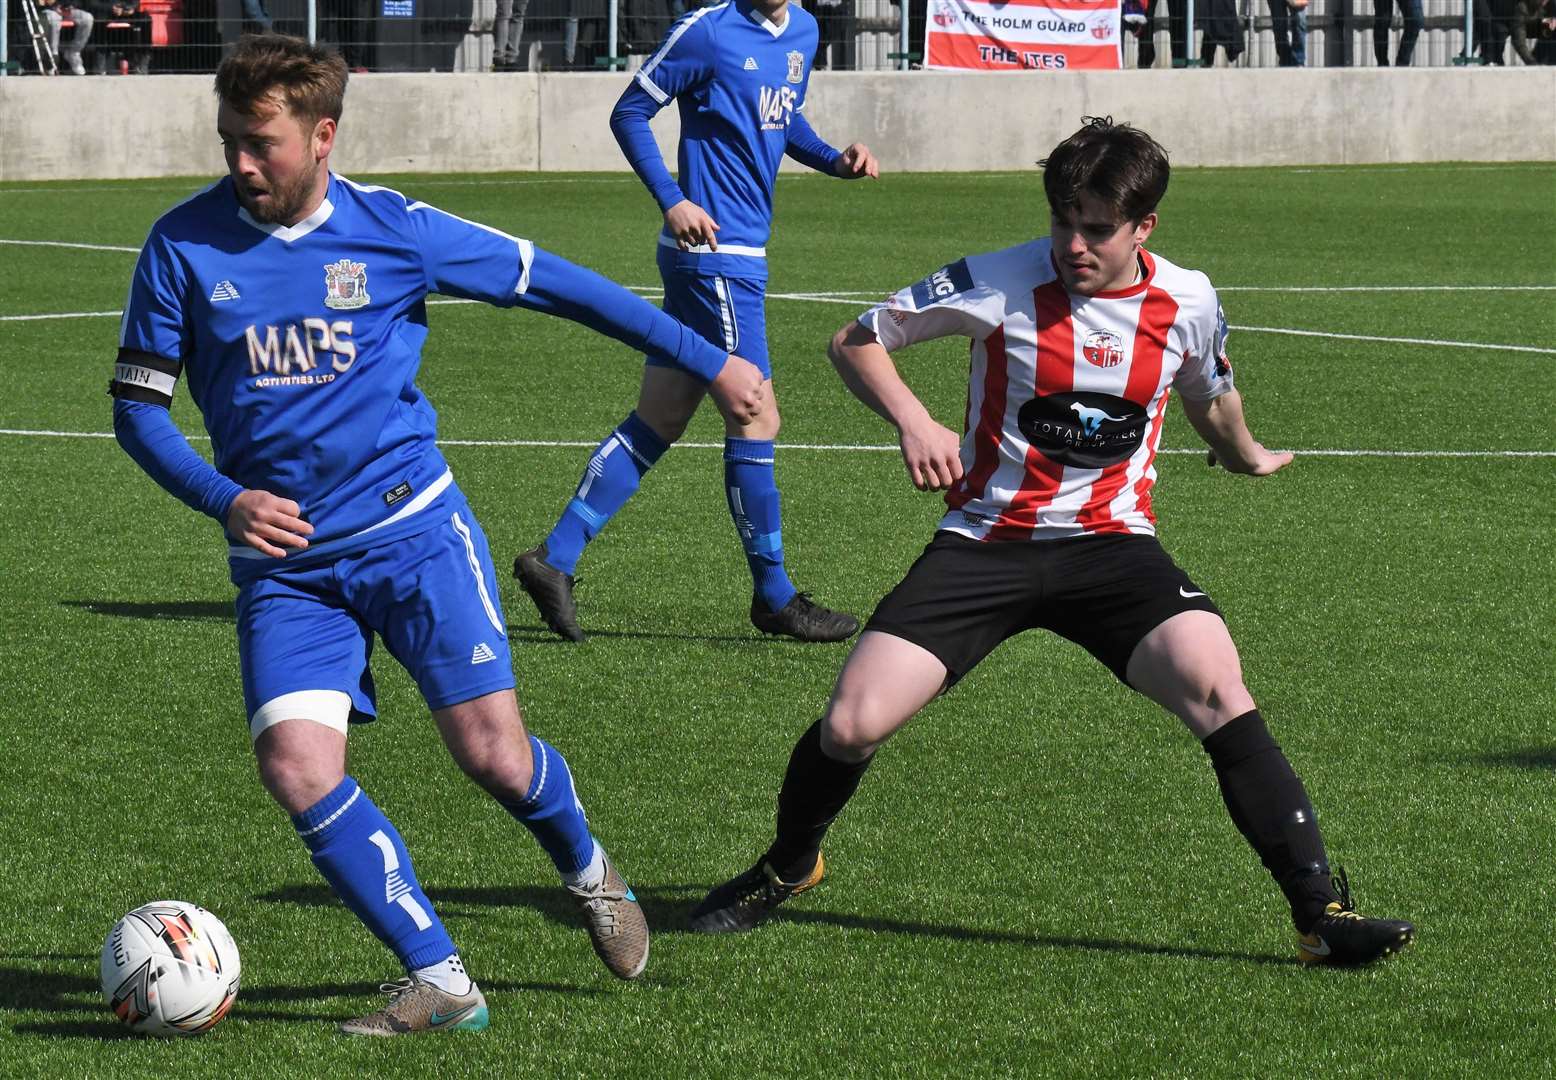 Deal's Macauley Murray on the ball. Picture: Marc Richards